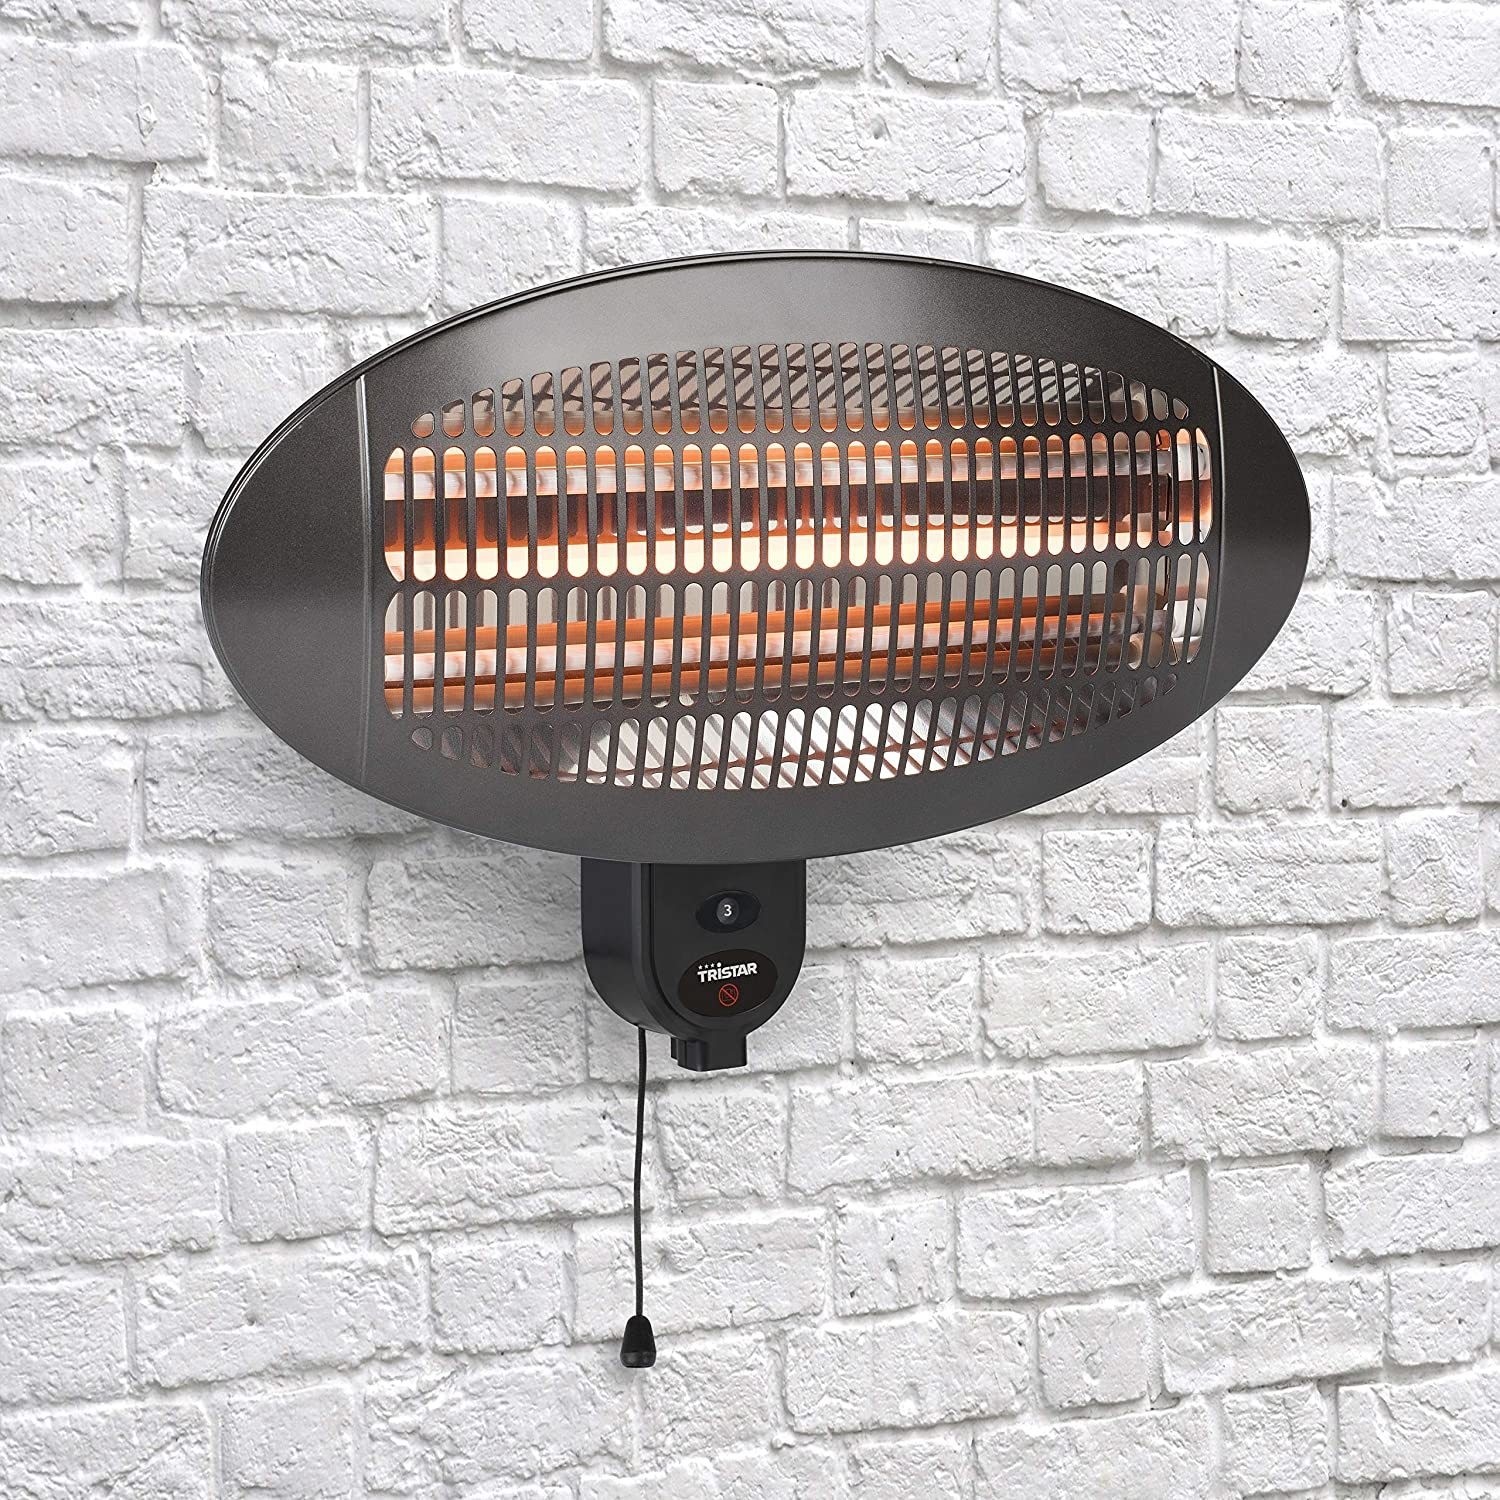 Tristar KA-5286 Wall Mounted Electric Patio Heater - 2kW with 3 Heat Settings